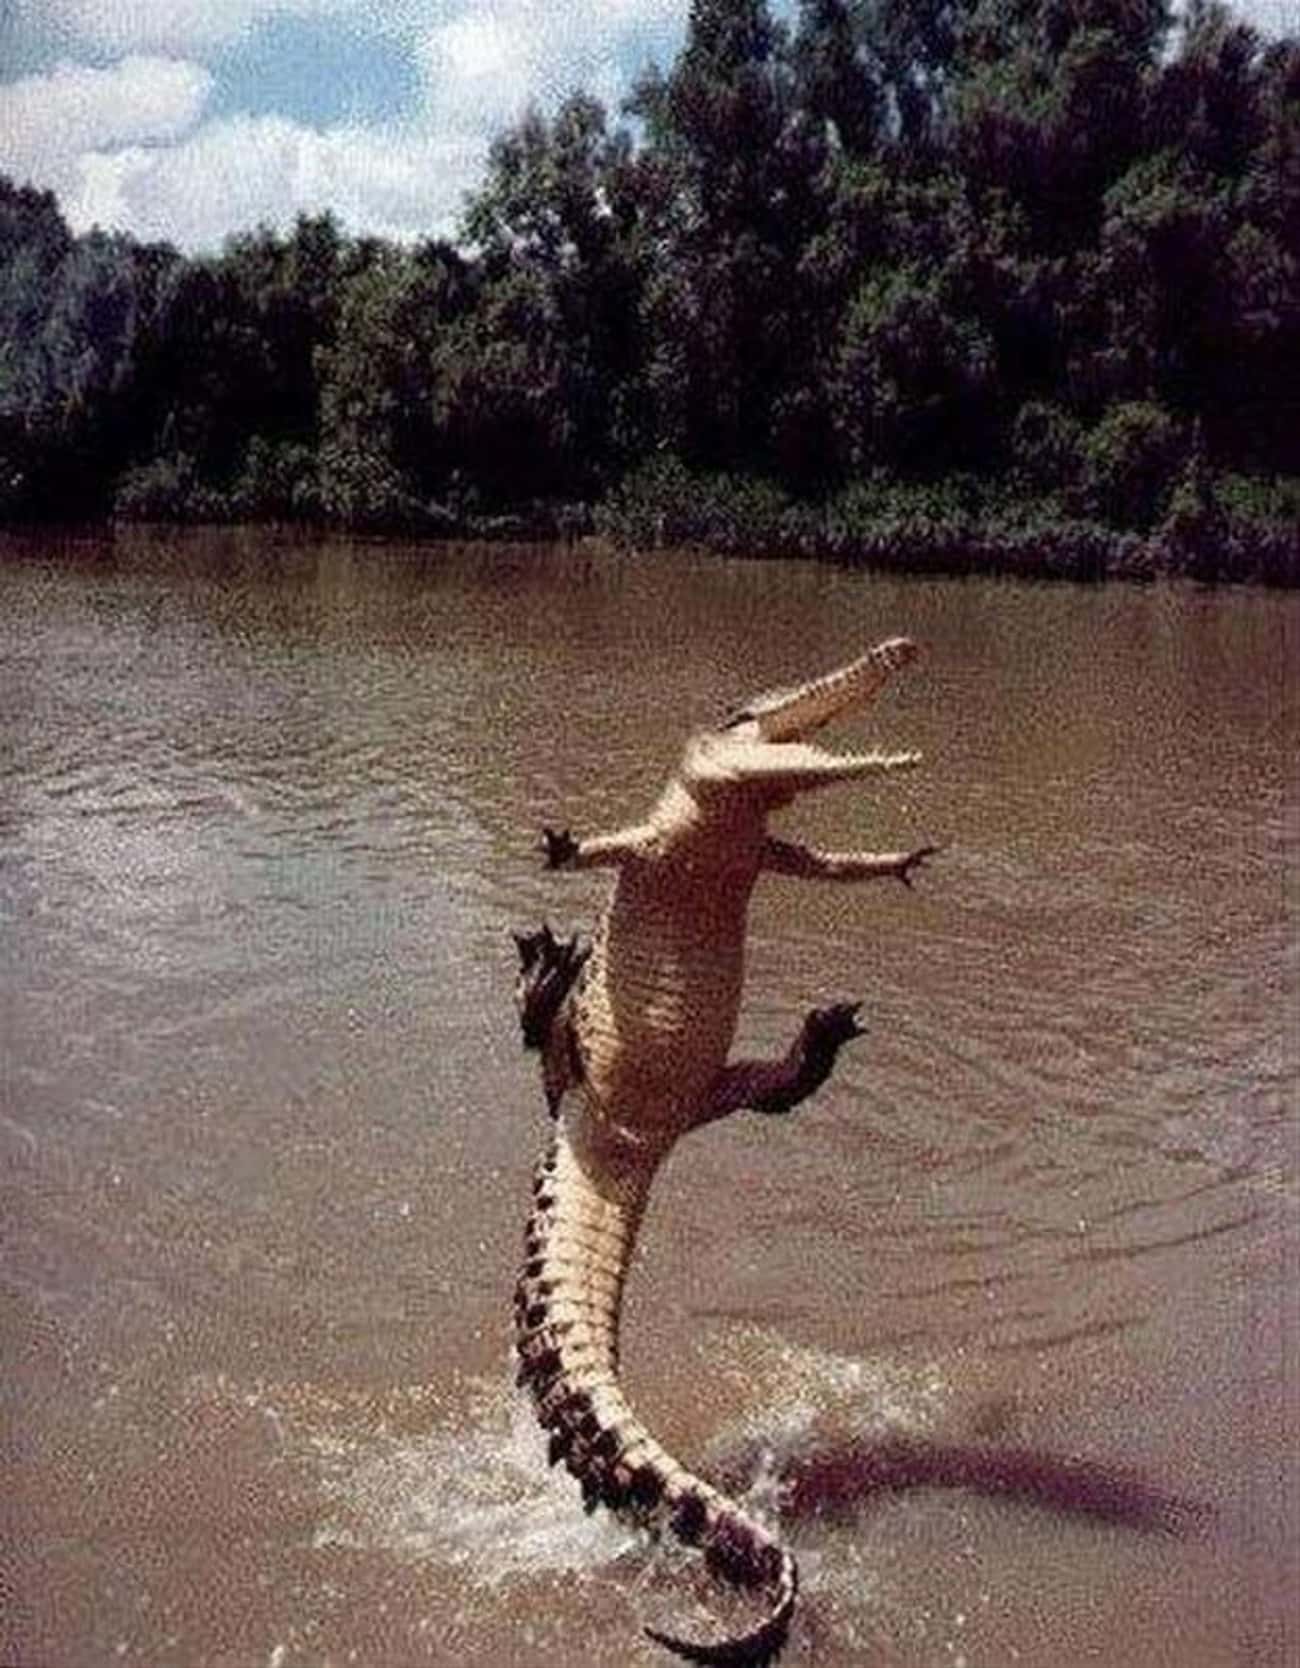 This Leaping Alligator